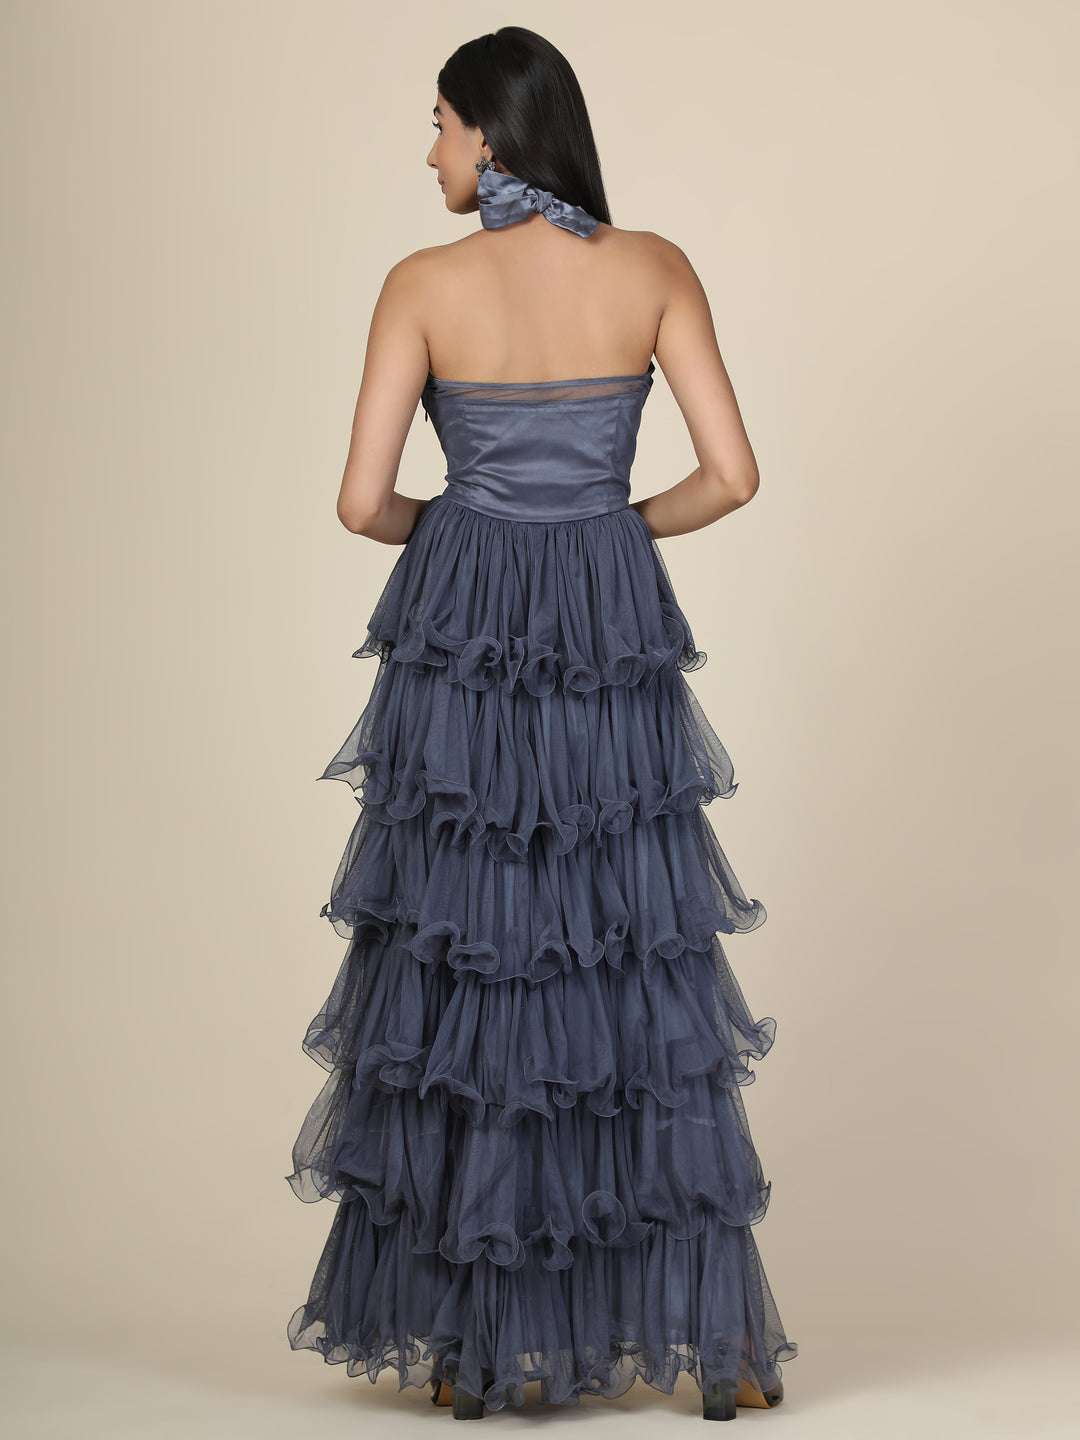 Miracolos By Ruchi's Classy Halter Neck Drape Net Party Evening Corset Gown  - Rent